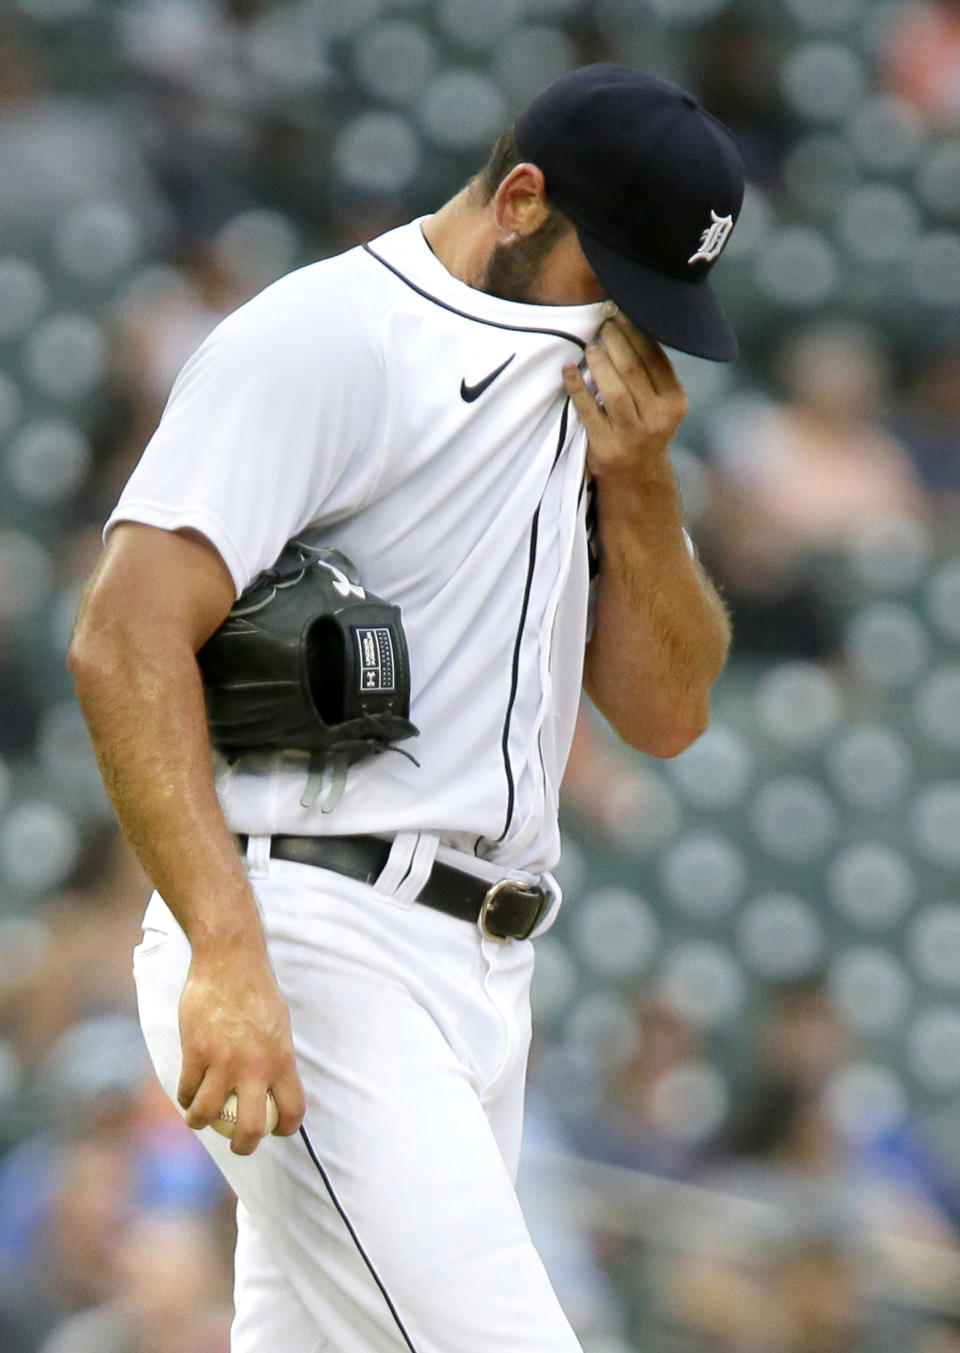 Detroit Tigers' Michael Fulmer walks back to the mound after giving up the go-ahead home run to Houston Astros' Carlos Correa during the sixth inning of the second baseball game of a doubleheader Saturday, June 26, 2021, in Detroit. (AP Photo/Duane Burleson)